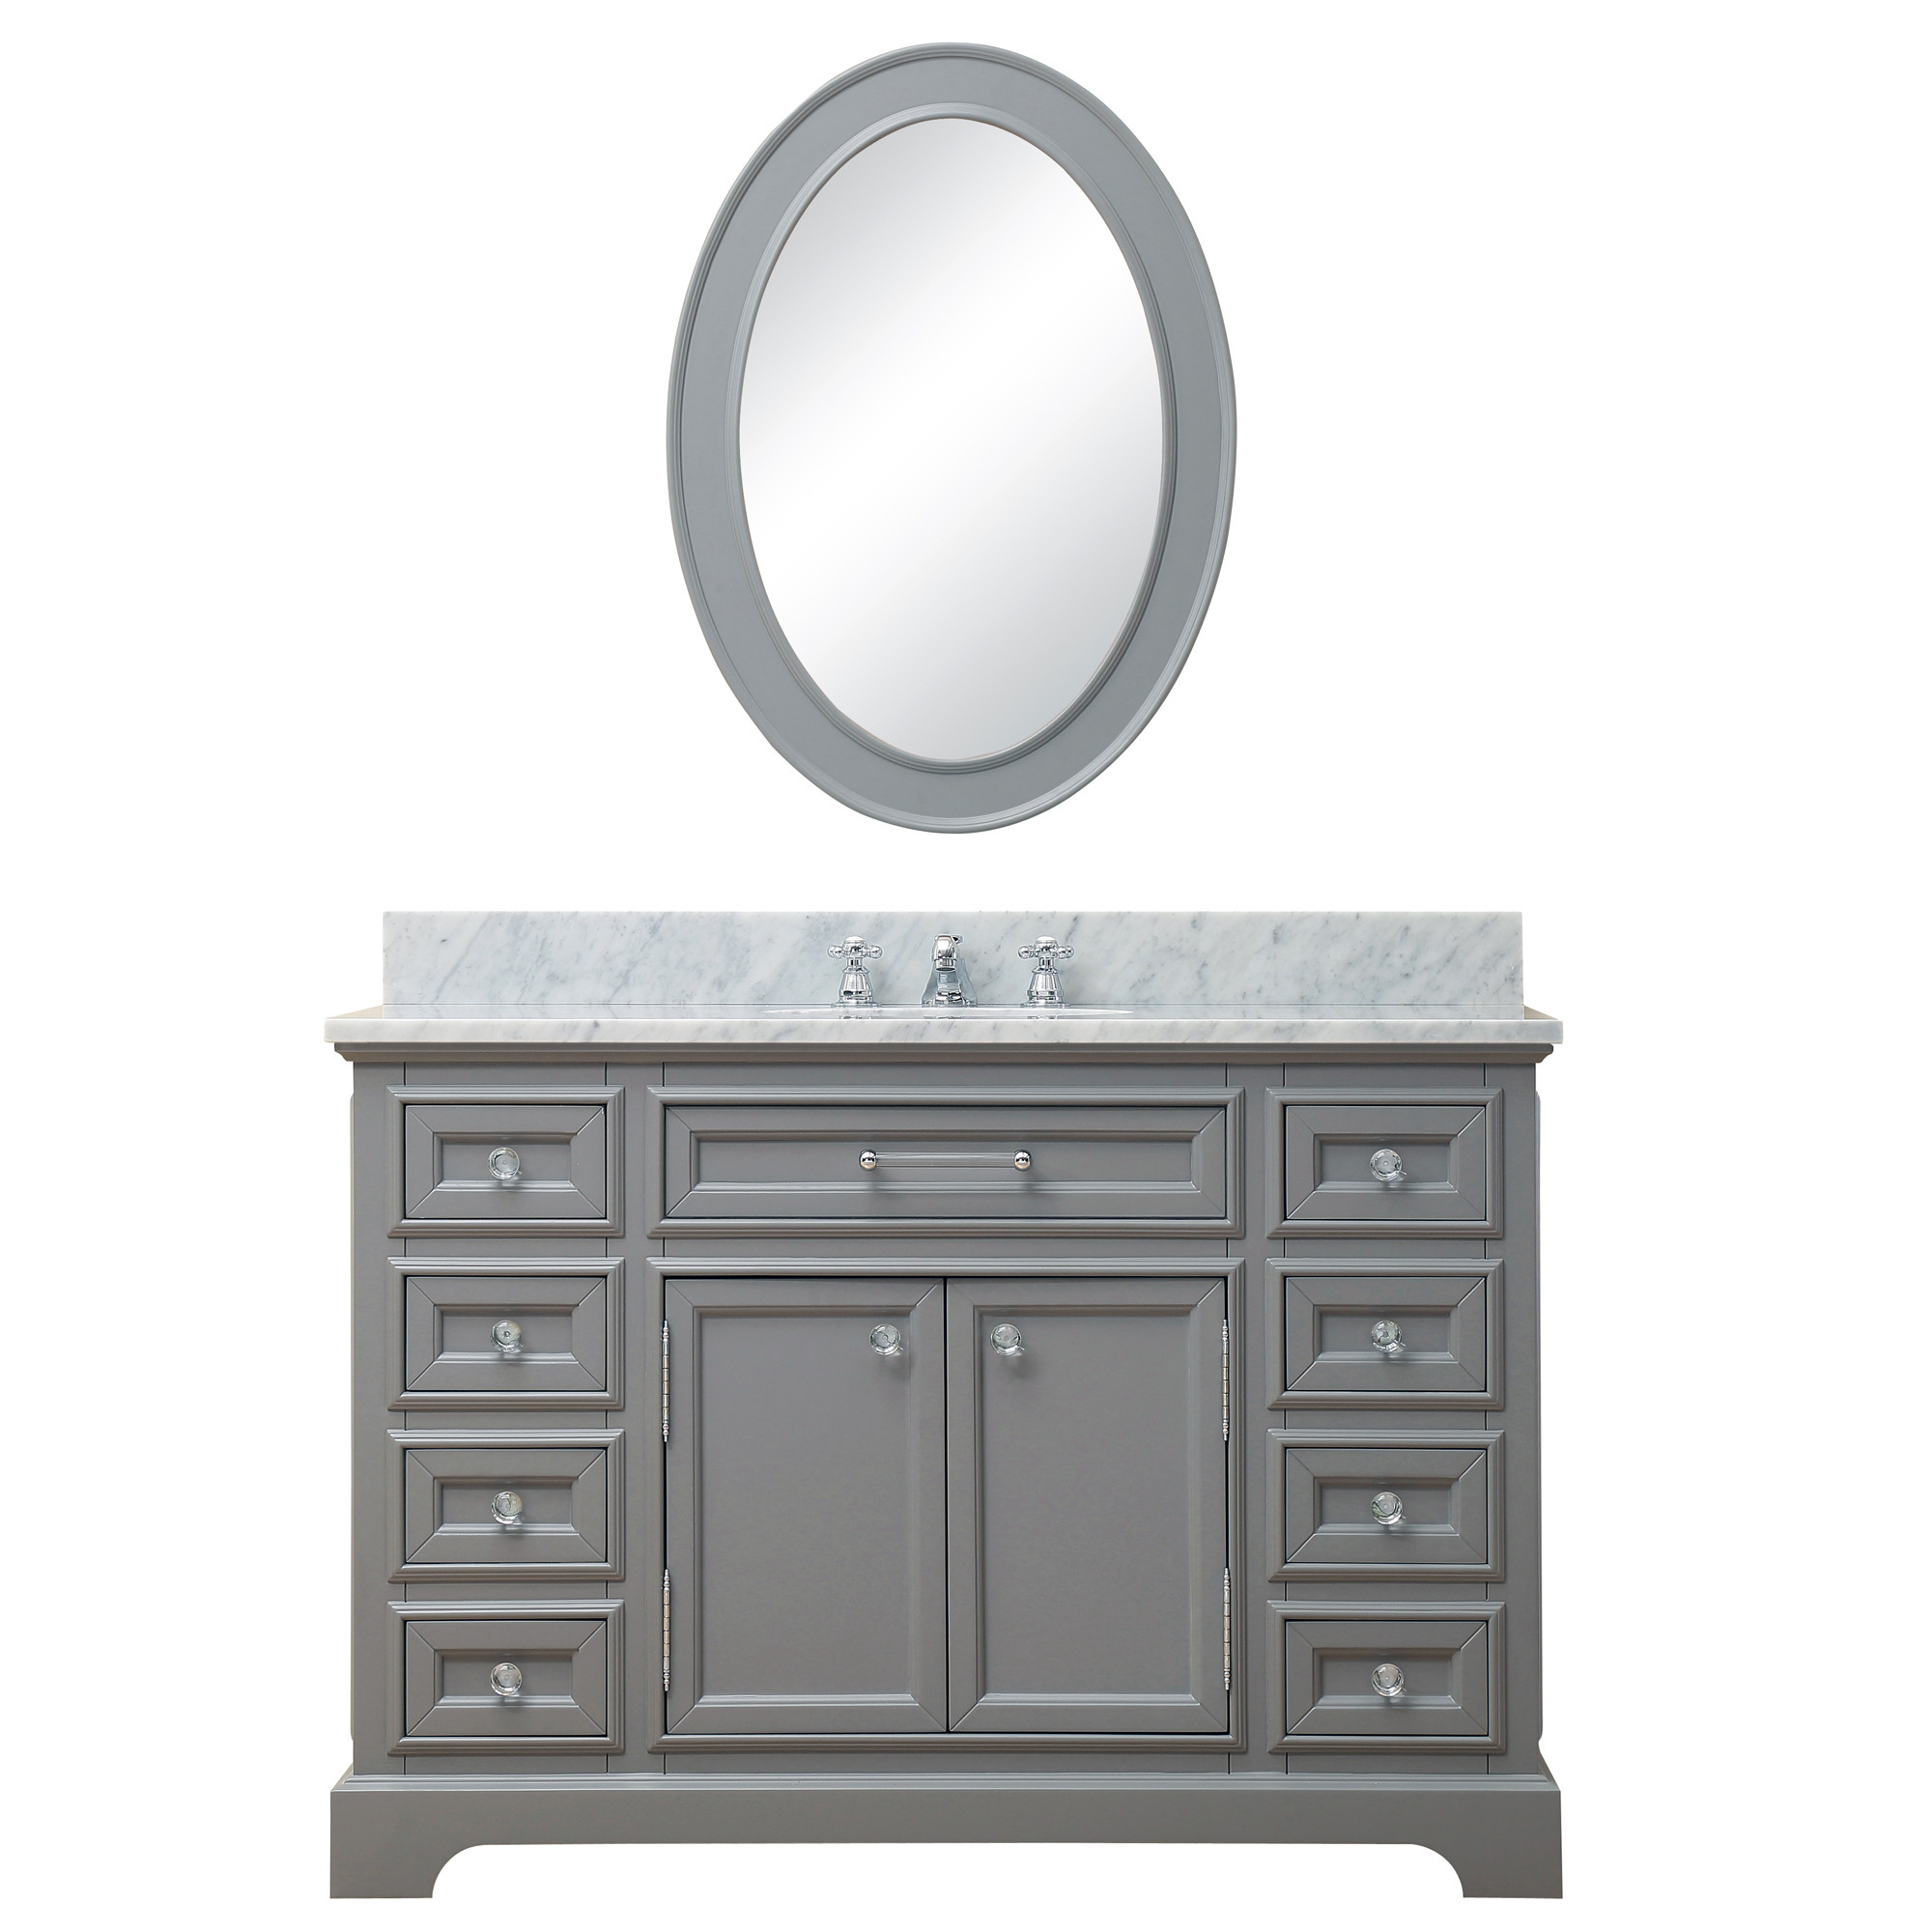 Water Creation Derby48GBF 48" Single Sink Vanity with Mirror And Faucet 